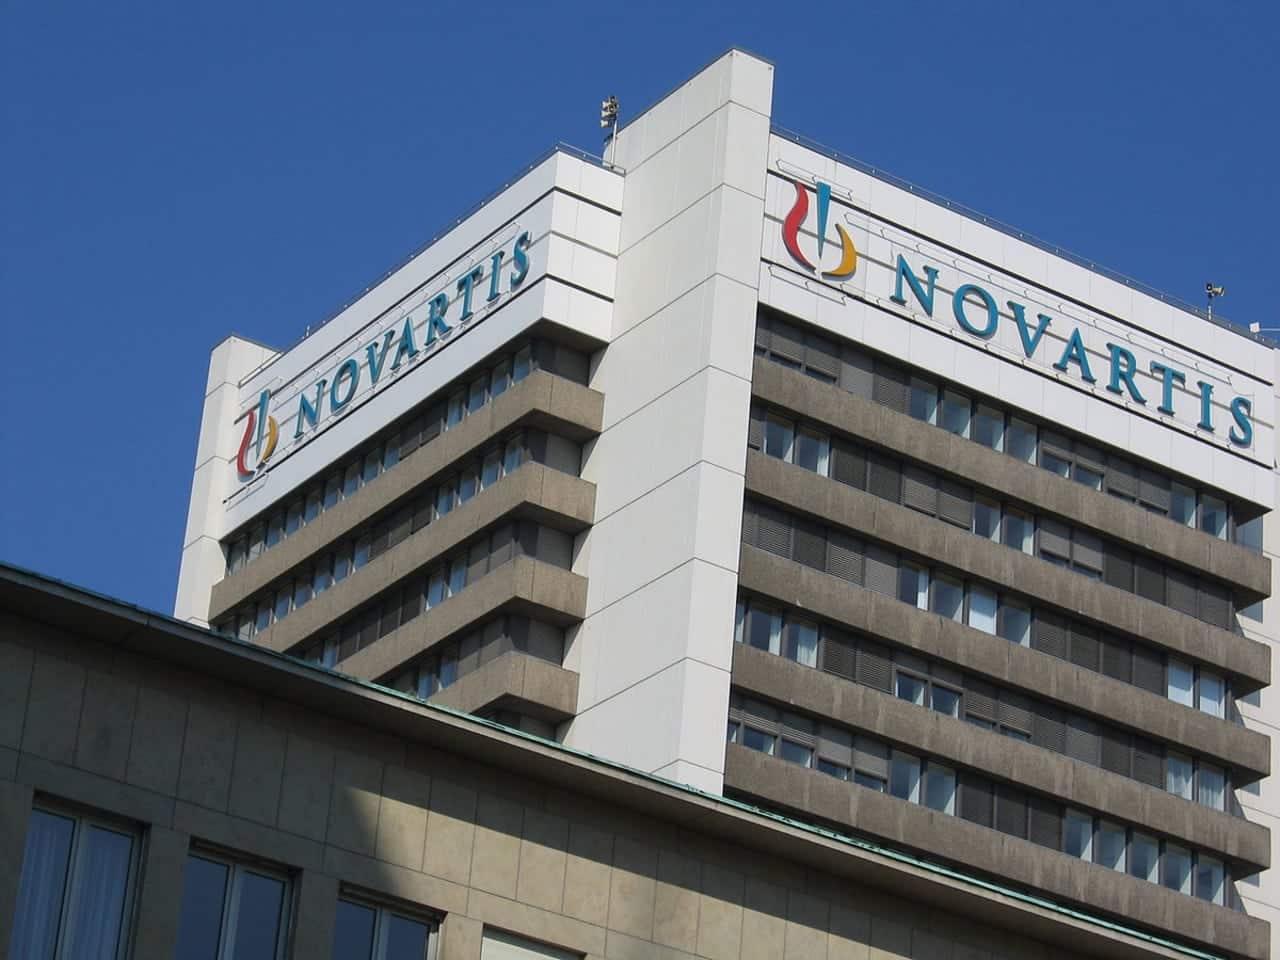 The Novartis campus has been sold and local leaders have several ideas for its future.